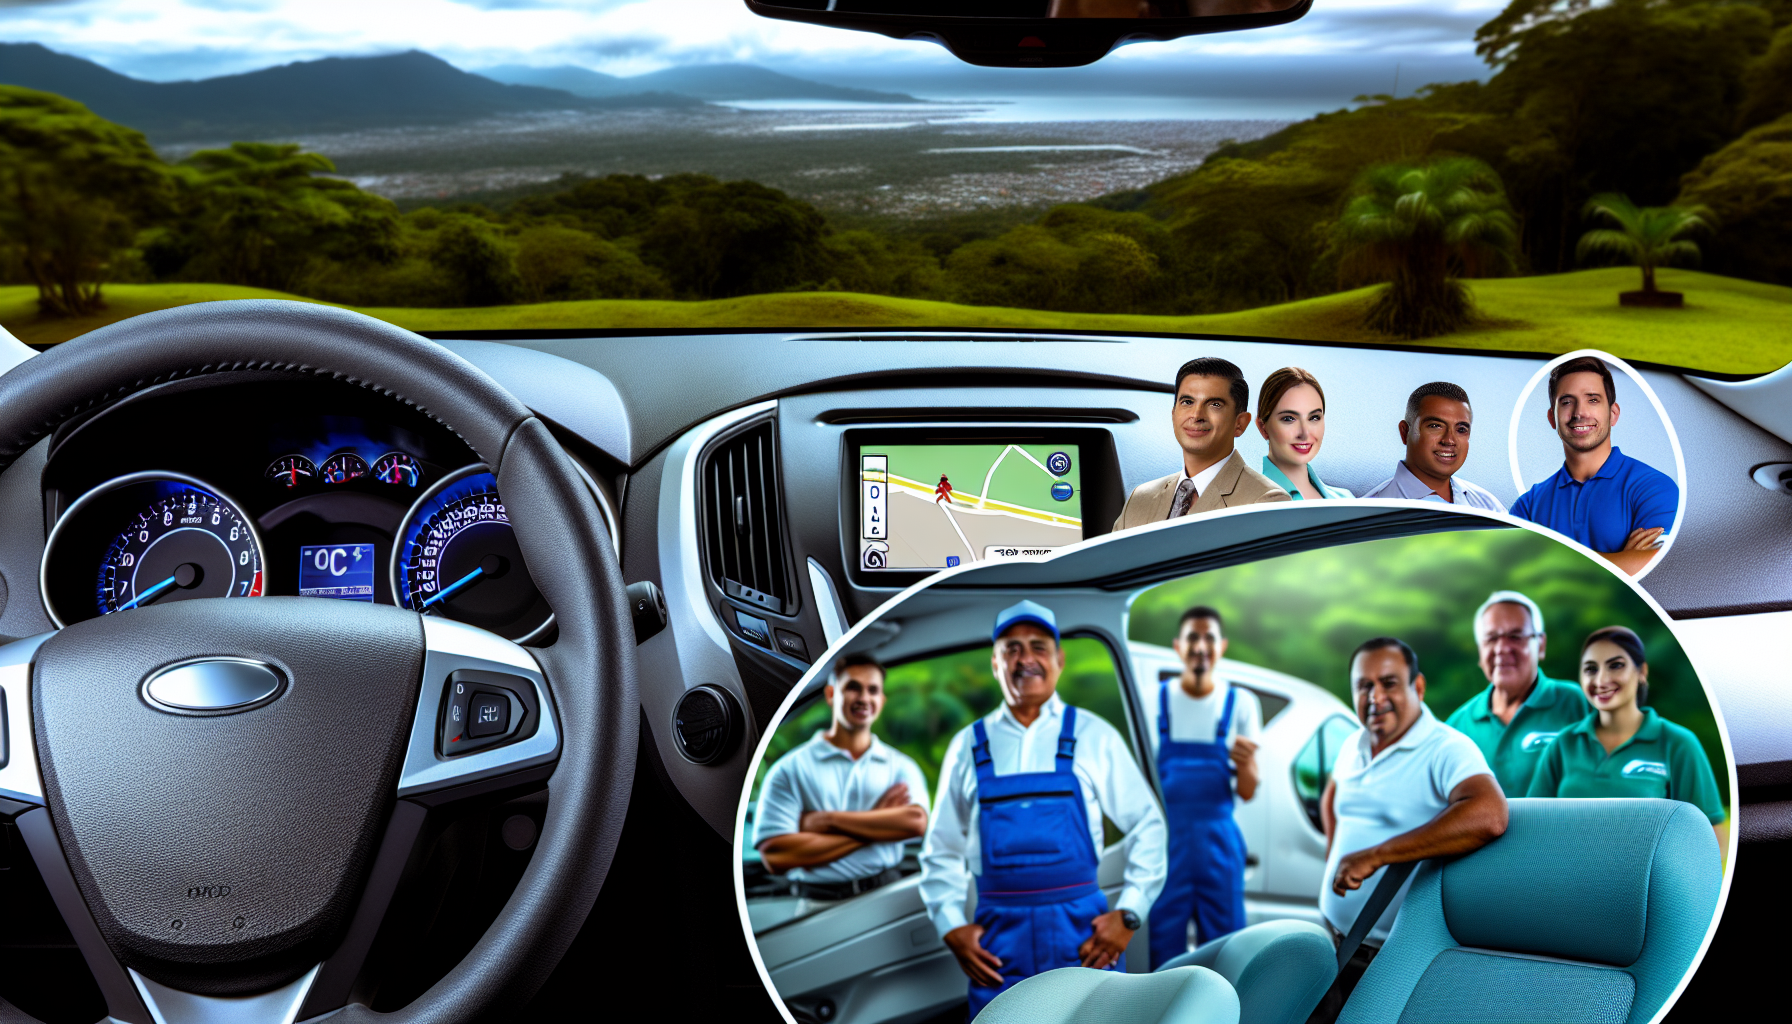 Convenience features offered by Economy Rent a Car in Costa Rica